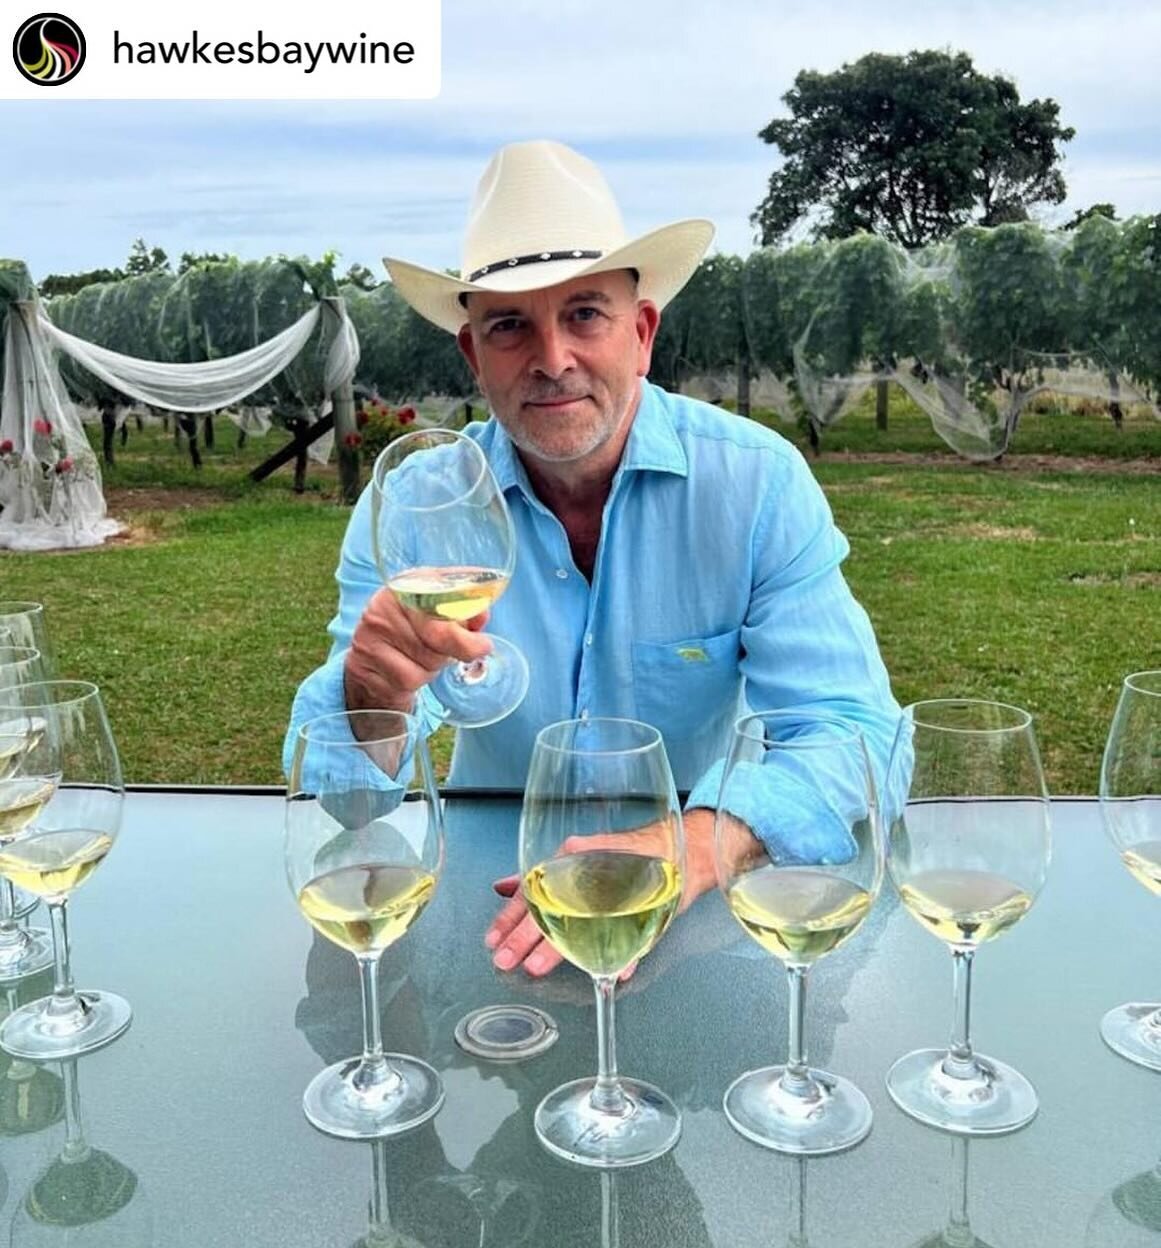 Making this selection is a privilege and a highlight of my wine year.

Posted @withregram &bull; @hawkesbaywine Hawke&rsquo;s Bay Winegrowers has announced the 12 Hawke&rsquo;s Bay Chardonnays selected by Cameron Douglas MS, for the fourth year of th